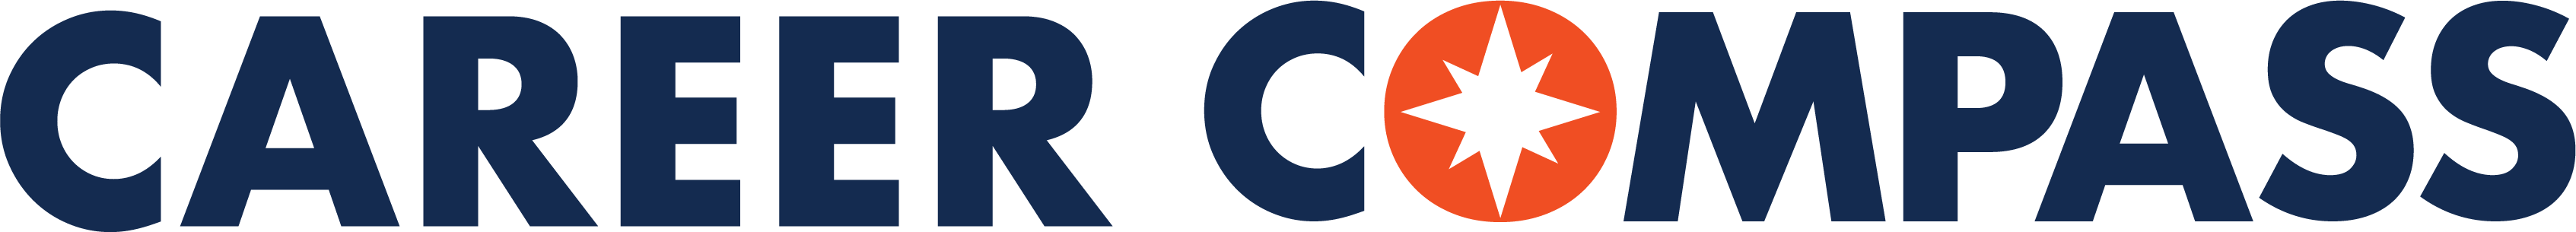 Career Compass Logo in blue and orange